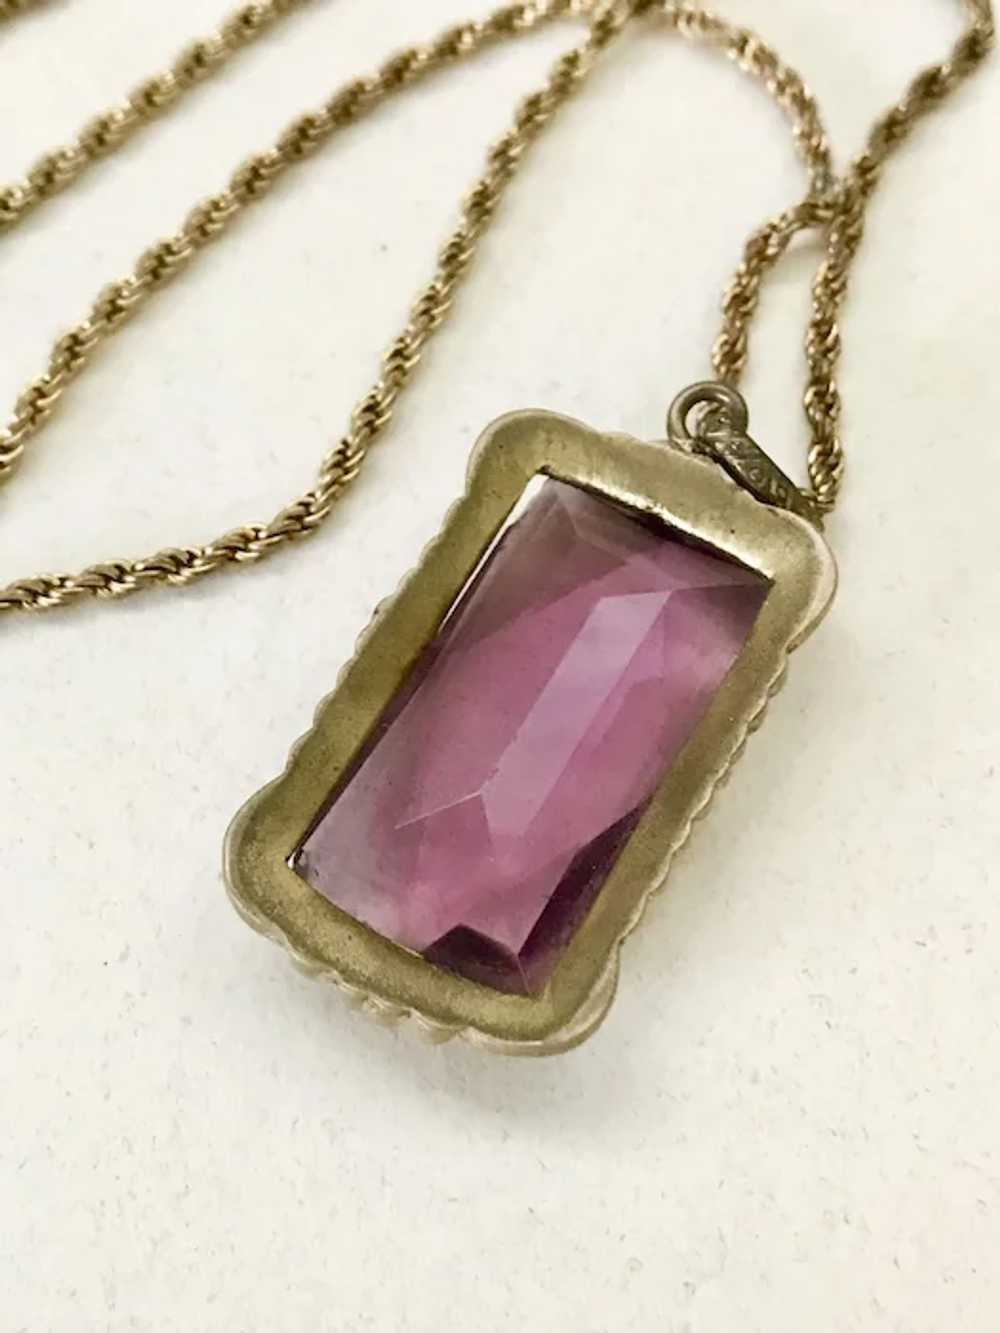 Victorian Gold Filled Faux Amethyst Necklace - image 3